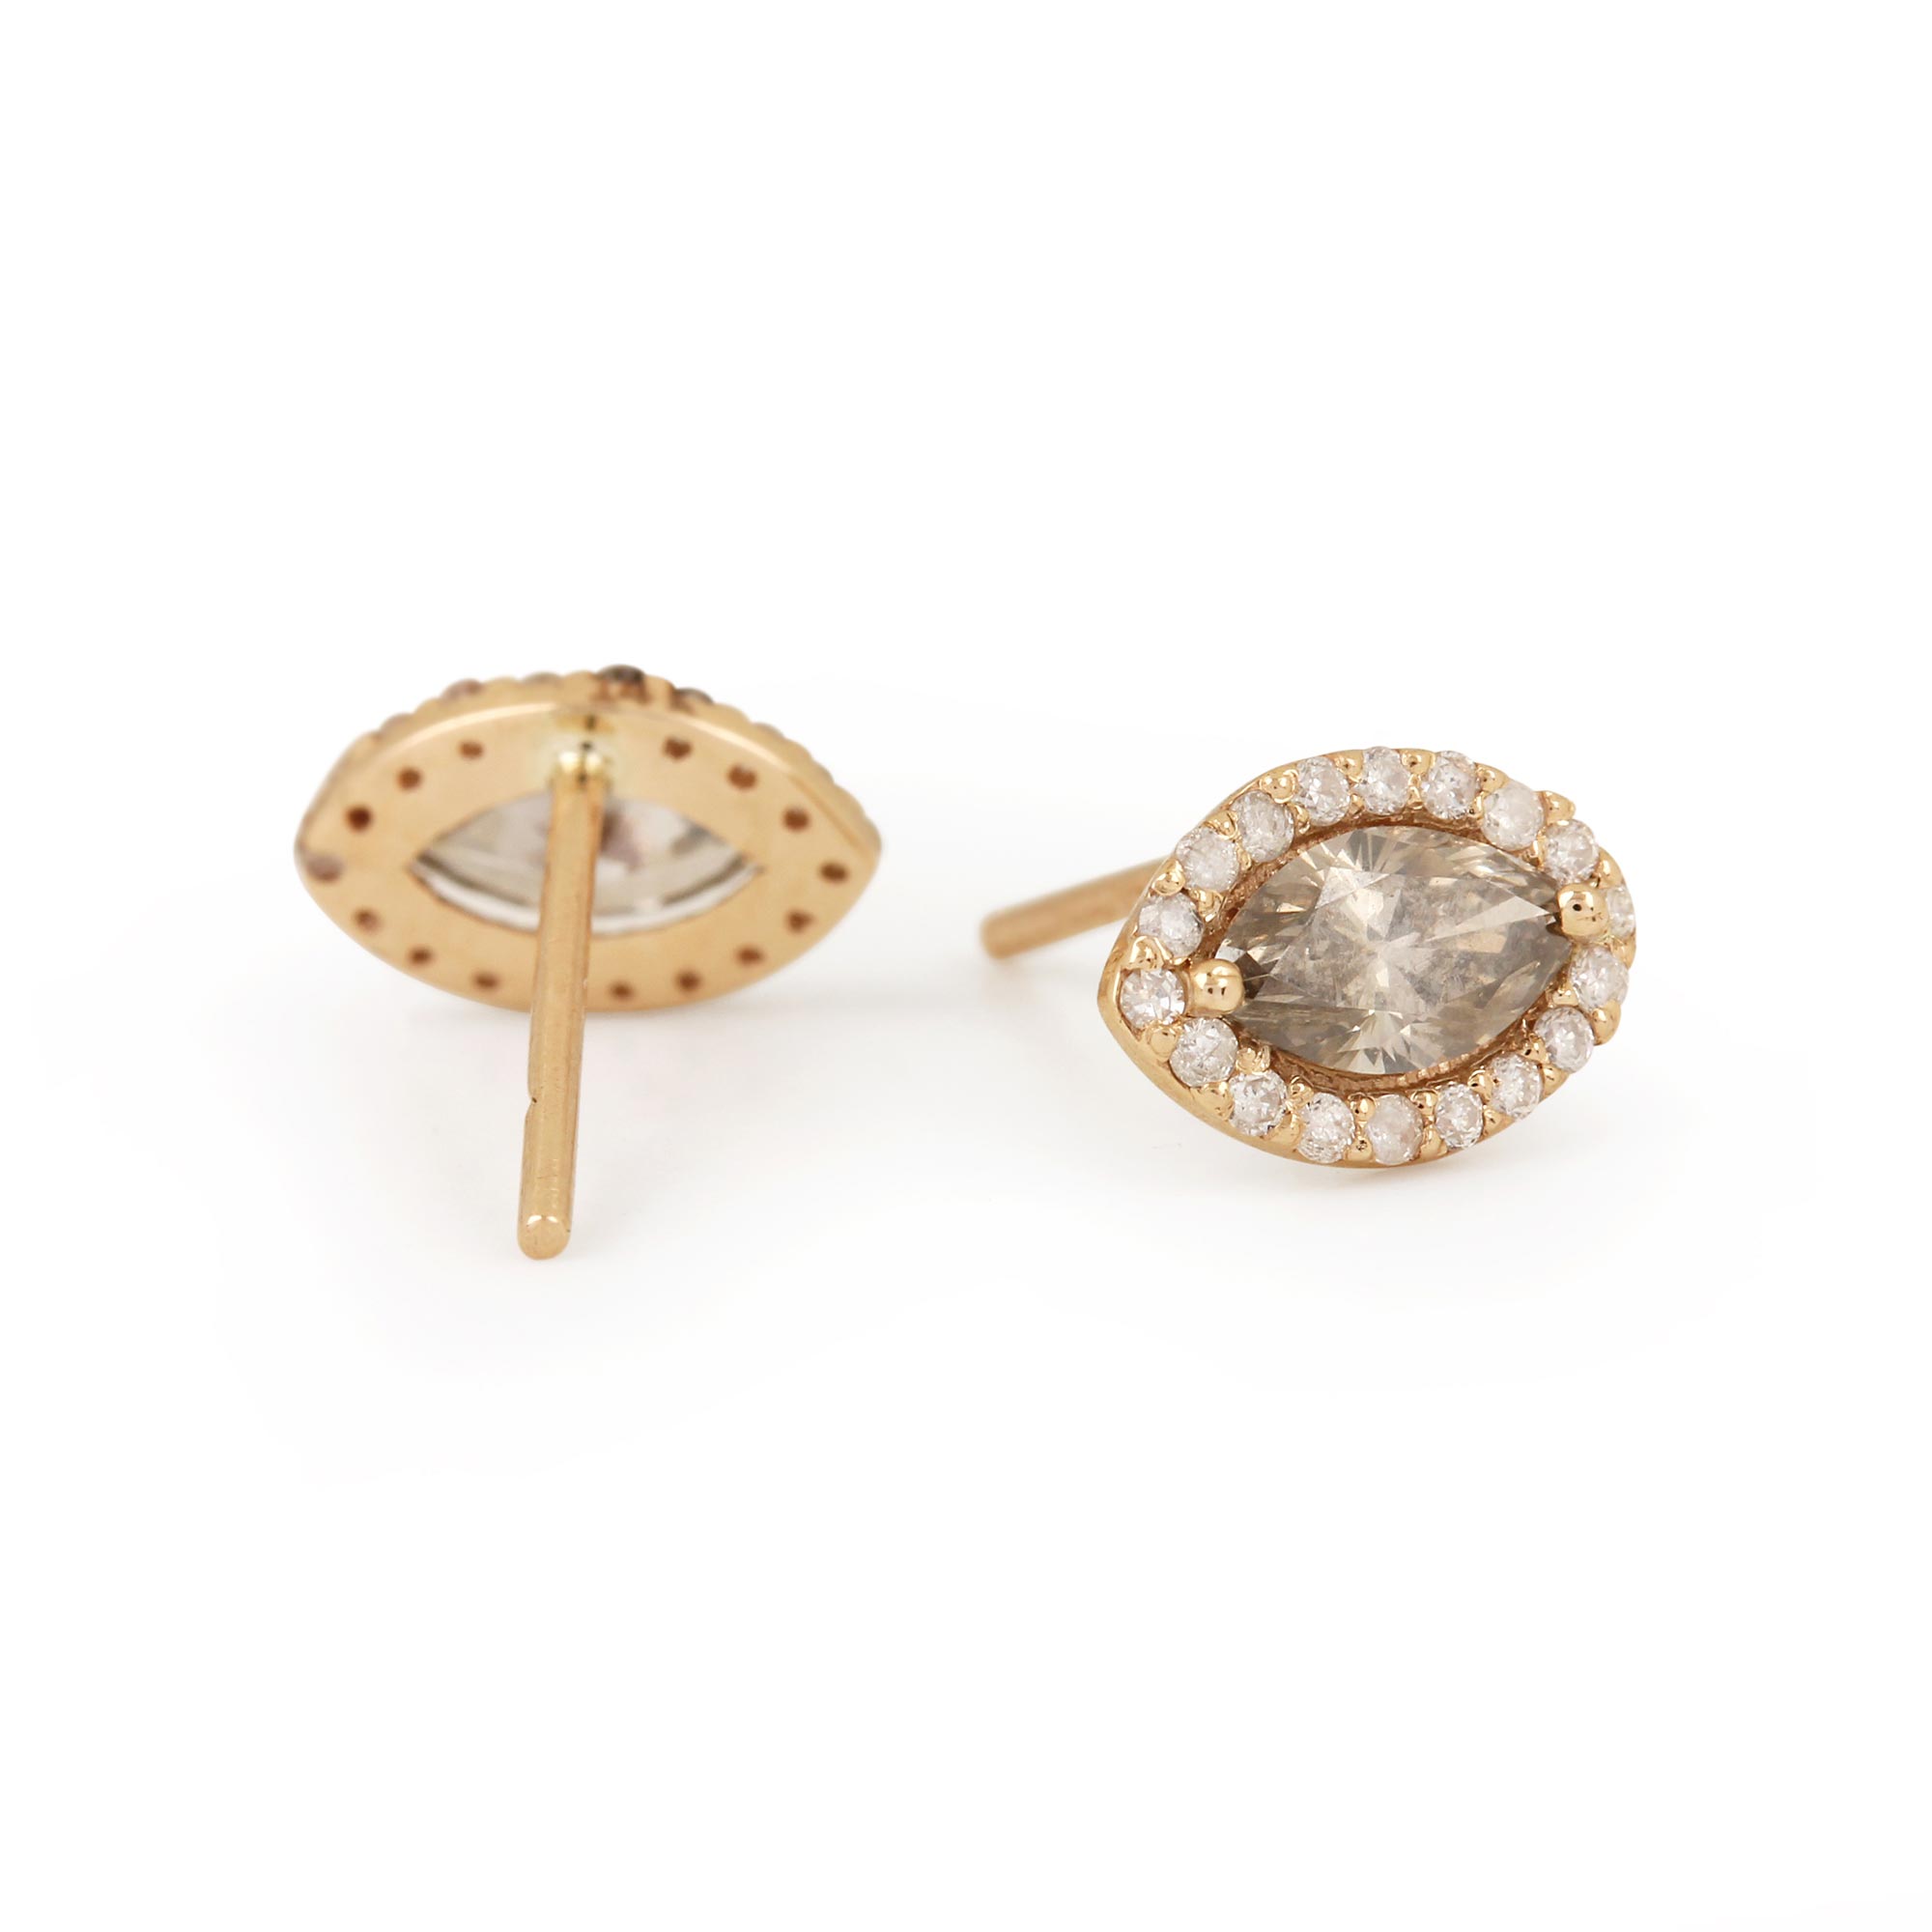 Natural Pave Diamond Stud Earrings 14K Solid Gold Jewelry